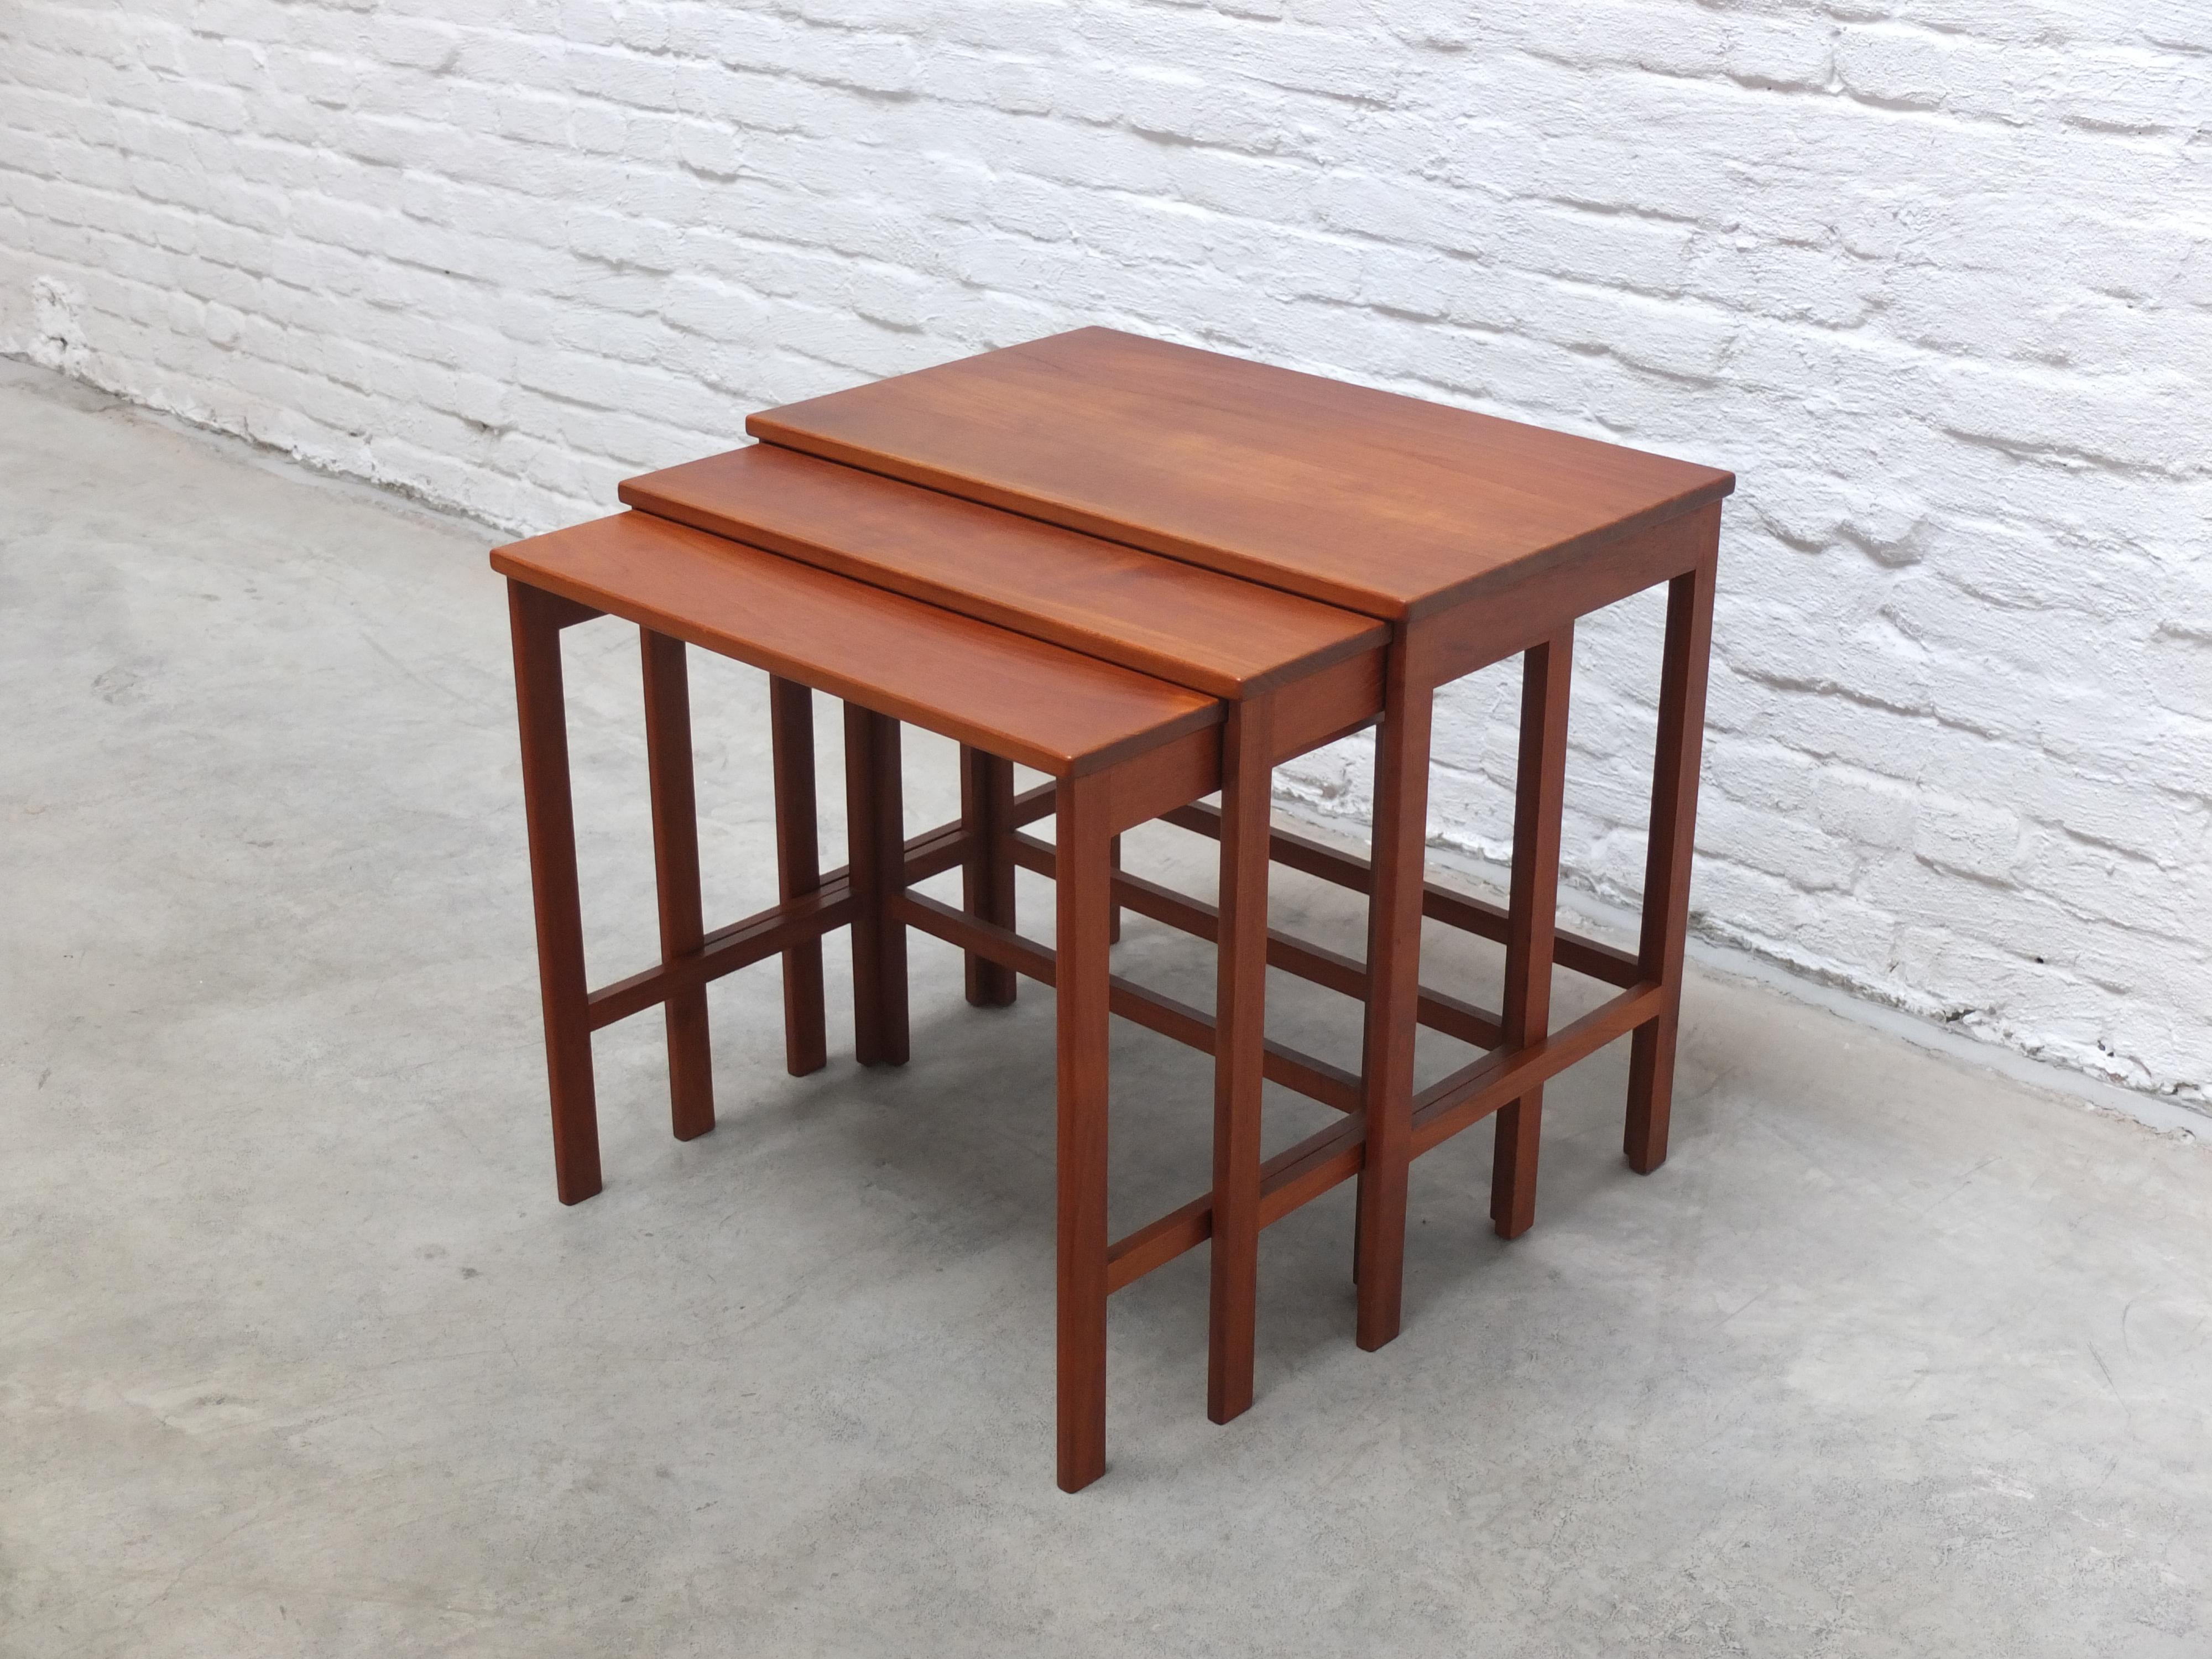 Beautiful set of nesting tables designed by Peter Hvidt & Orla Mølgaard-Nielsen for France and Son, 1950s. This set features three tables that slide into each other. Made of solid teak wood and in very good condition. A very fine Danish Modern